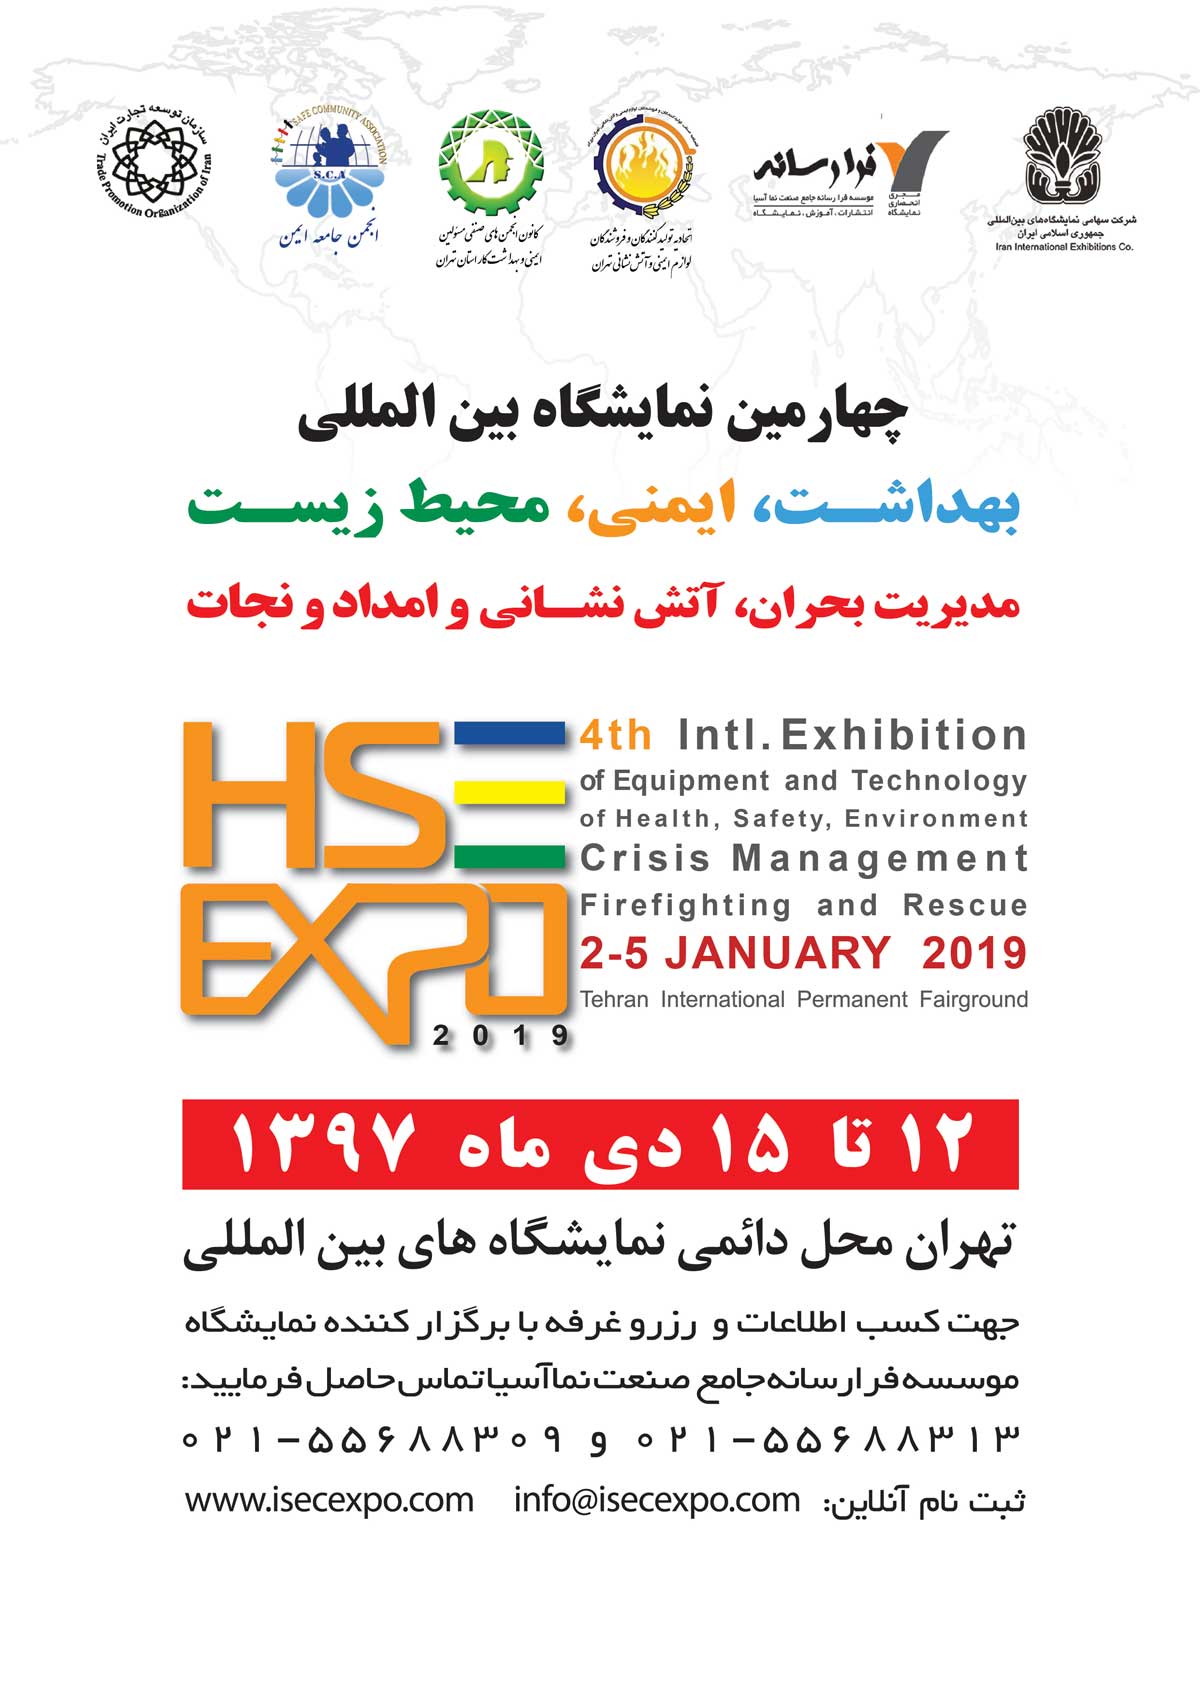 HSE-EXPO